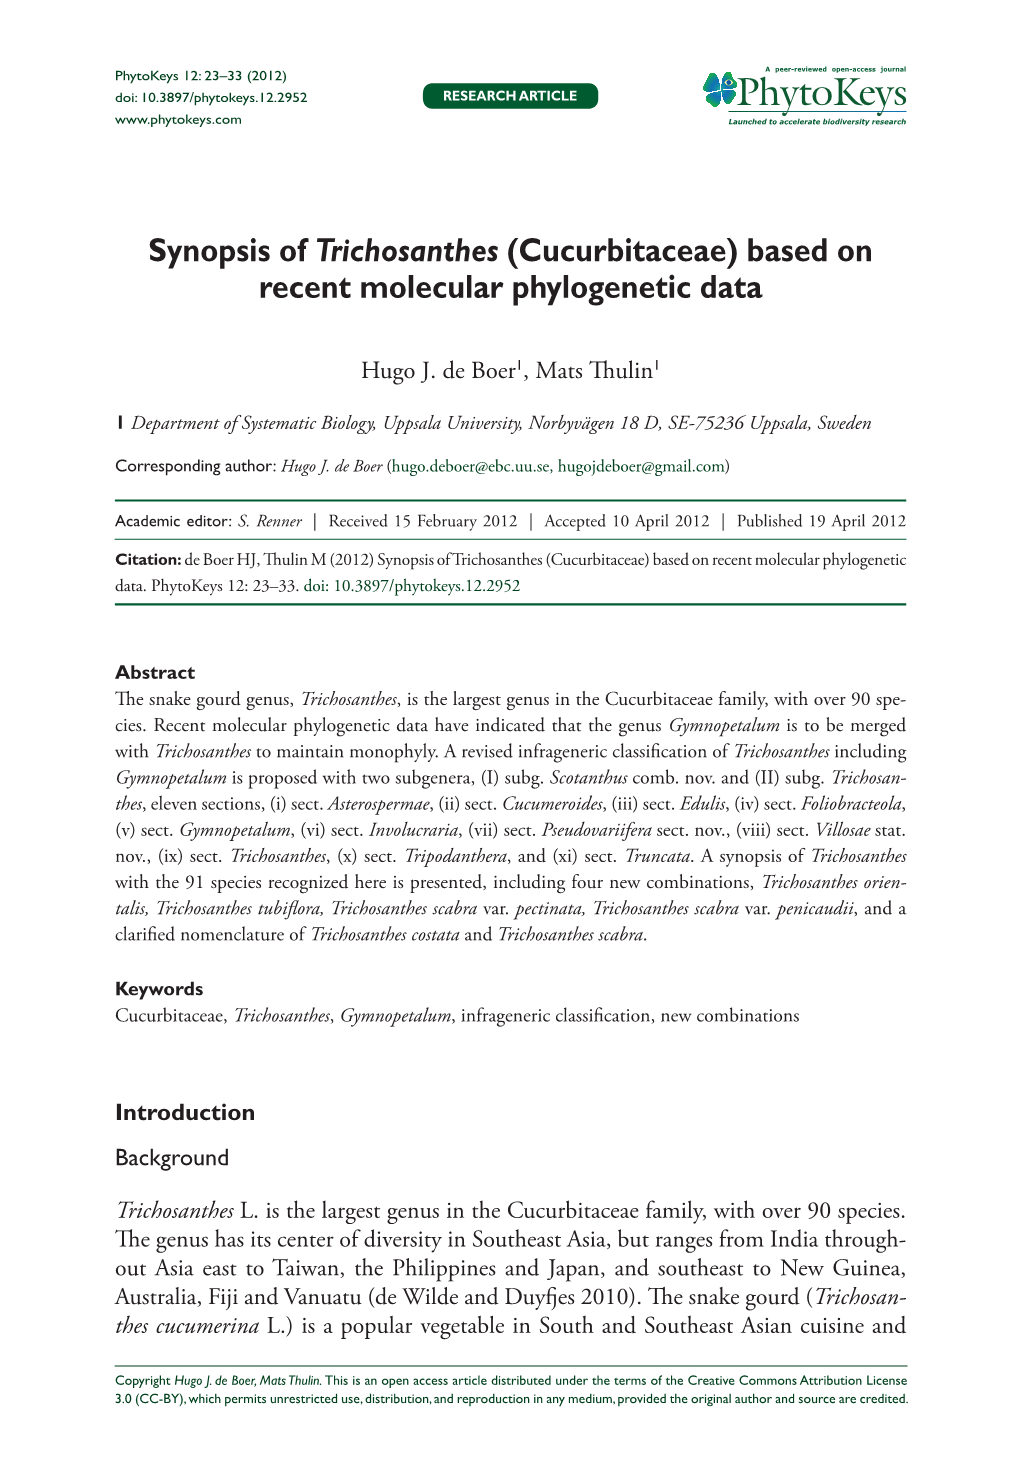 Synopsis of Trichosanthes (Cucurbitaceae) Based on Recent Molecular Phylogenetic Data